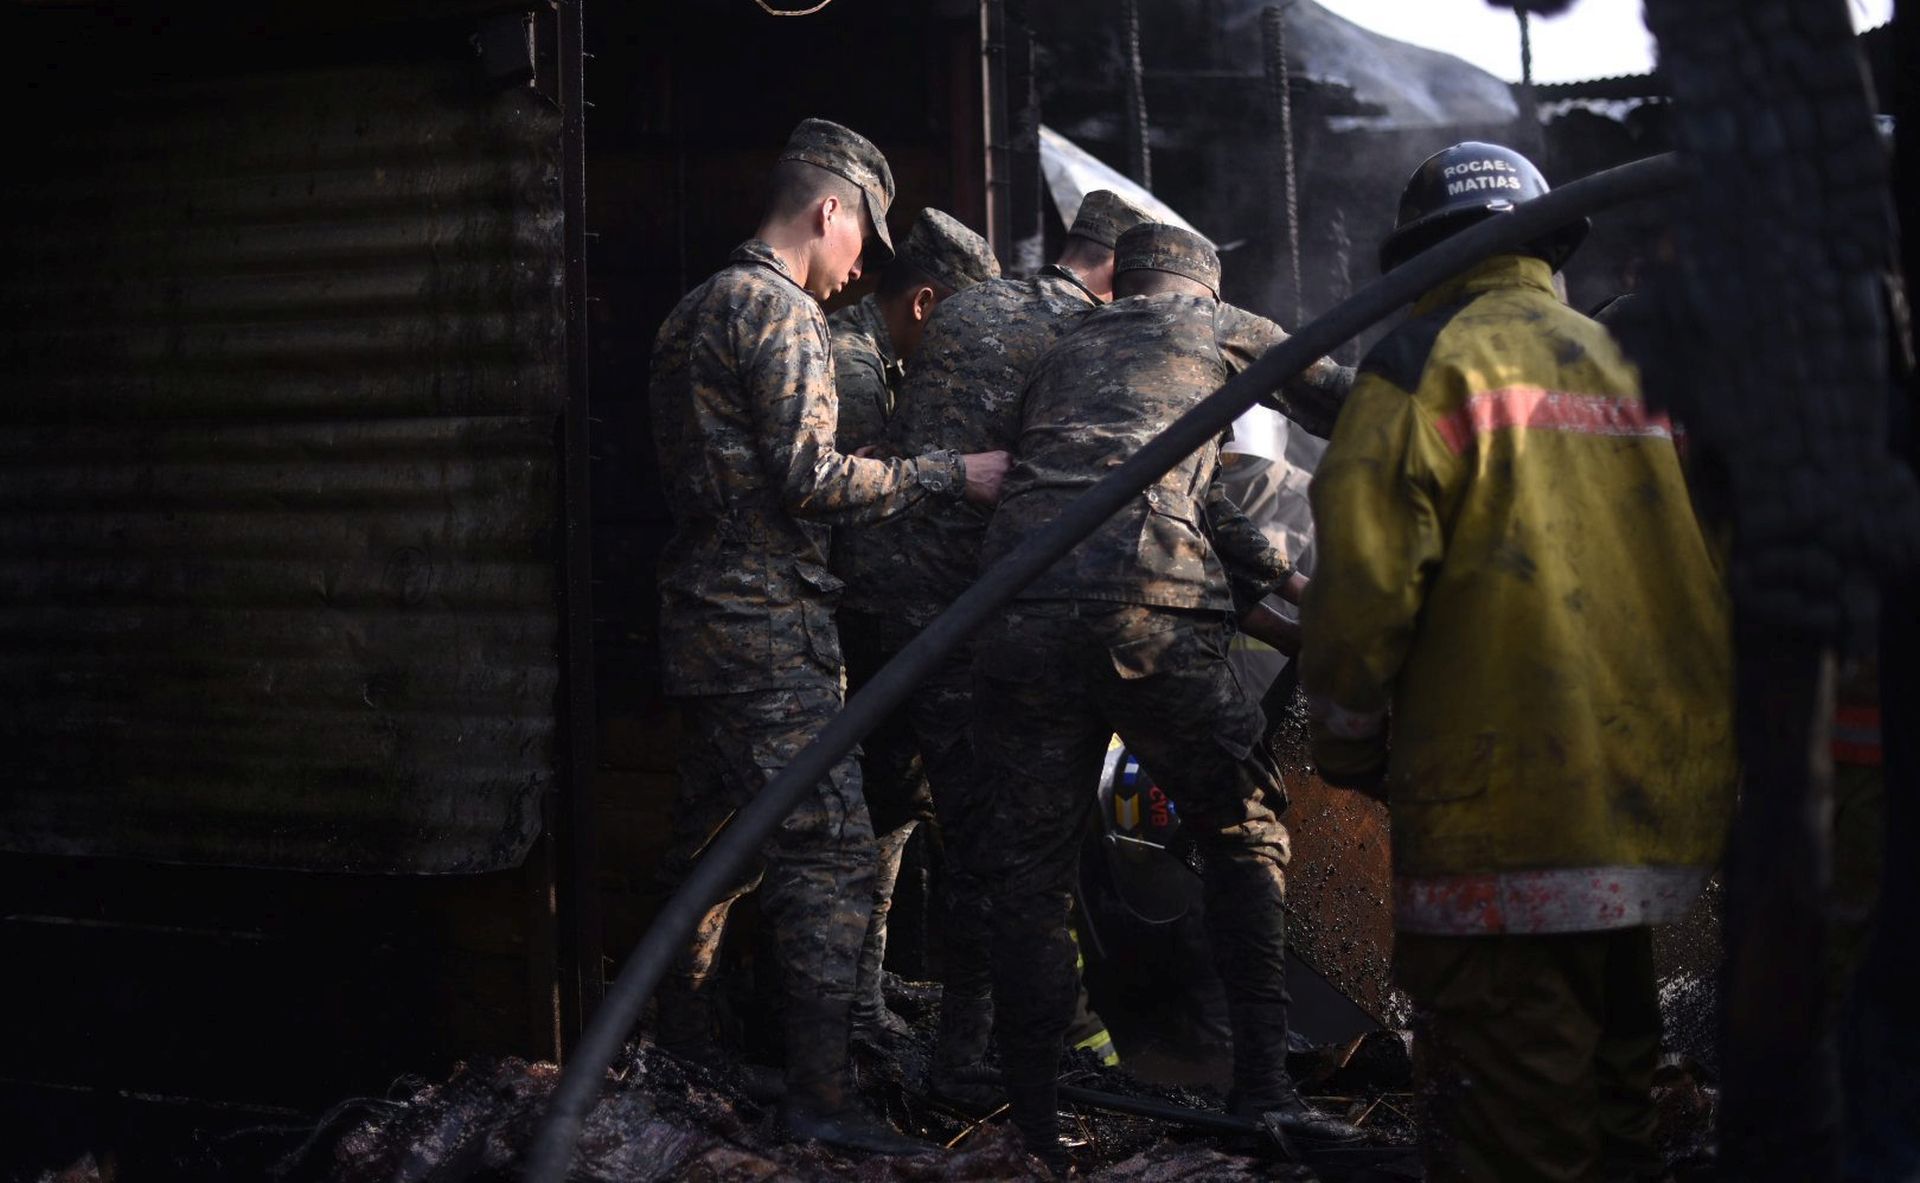 epa05218568 Guatemalan firefighters and soldiers work at the site after putting out the fire at La Termita local market in Guatemala City, Guatemala, 18 March 2016. At least two children died due to the fire that also caused lost of large amount of goods, authorities said.  EPA/SANTIAGO BILLY